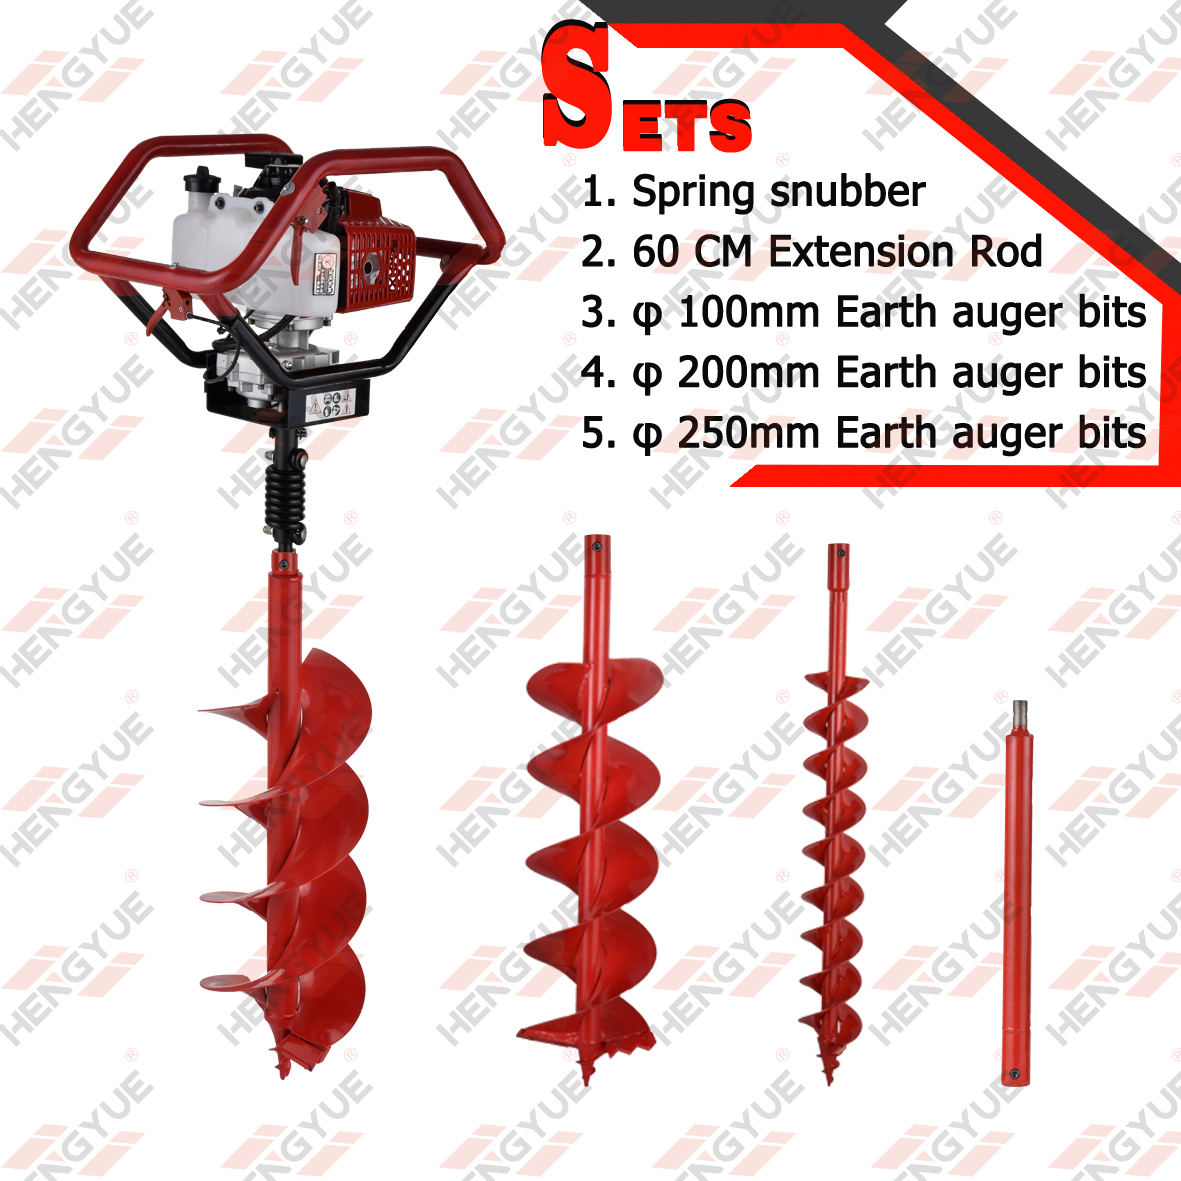 HONDA Earth Auger 1 Or 2 Man Operated Earth Auger with Double Triggers